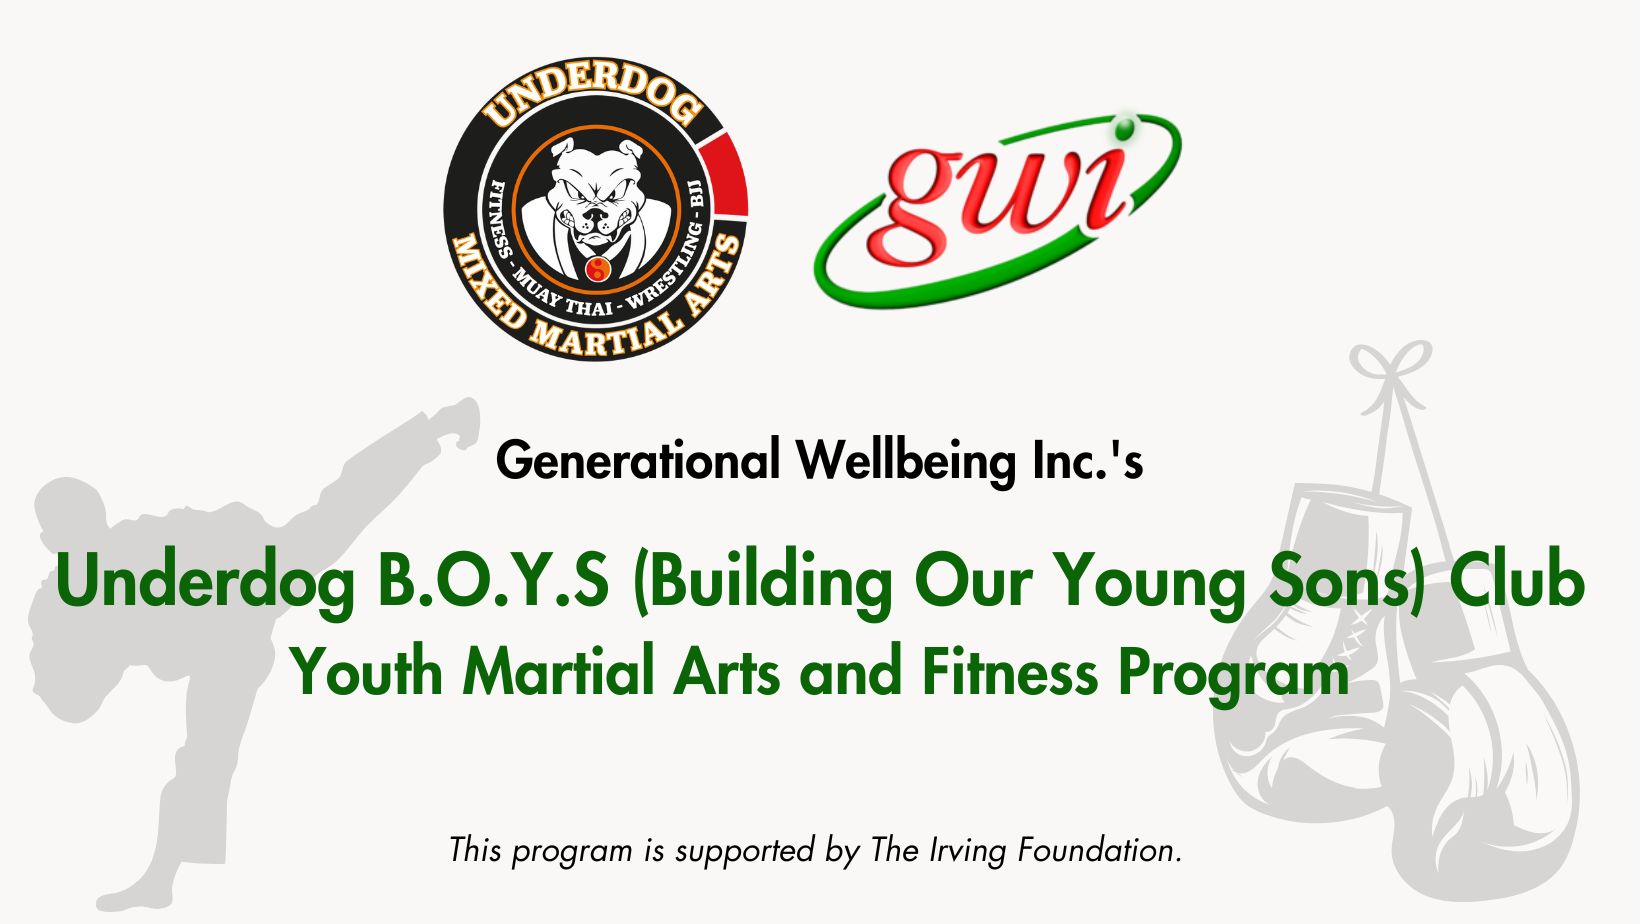 GWI Youth Martial Arts and Fitness Program - Underdog B.O.Y.S (Building Our Young Sons) Club